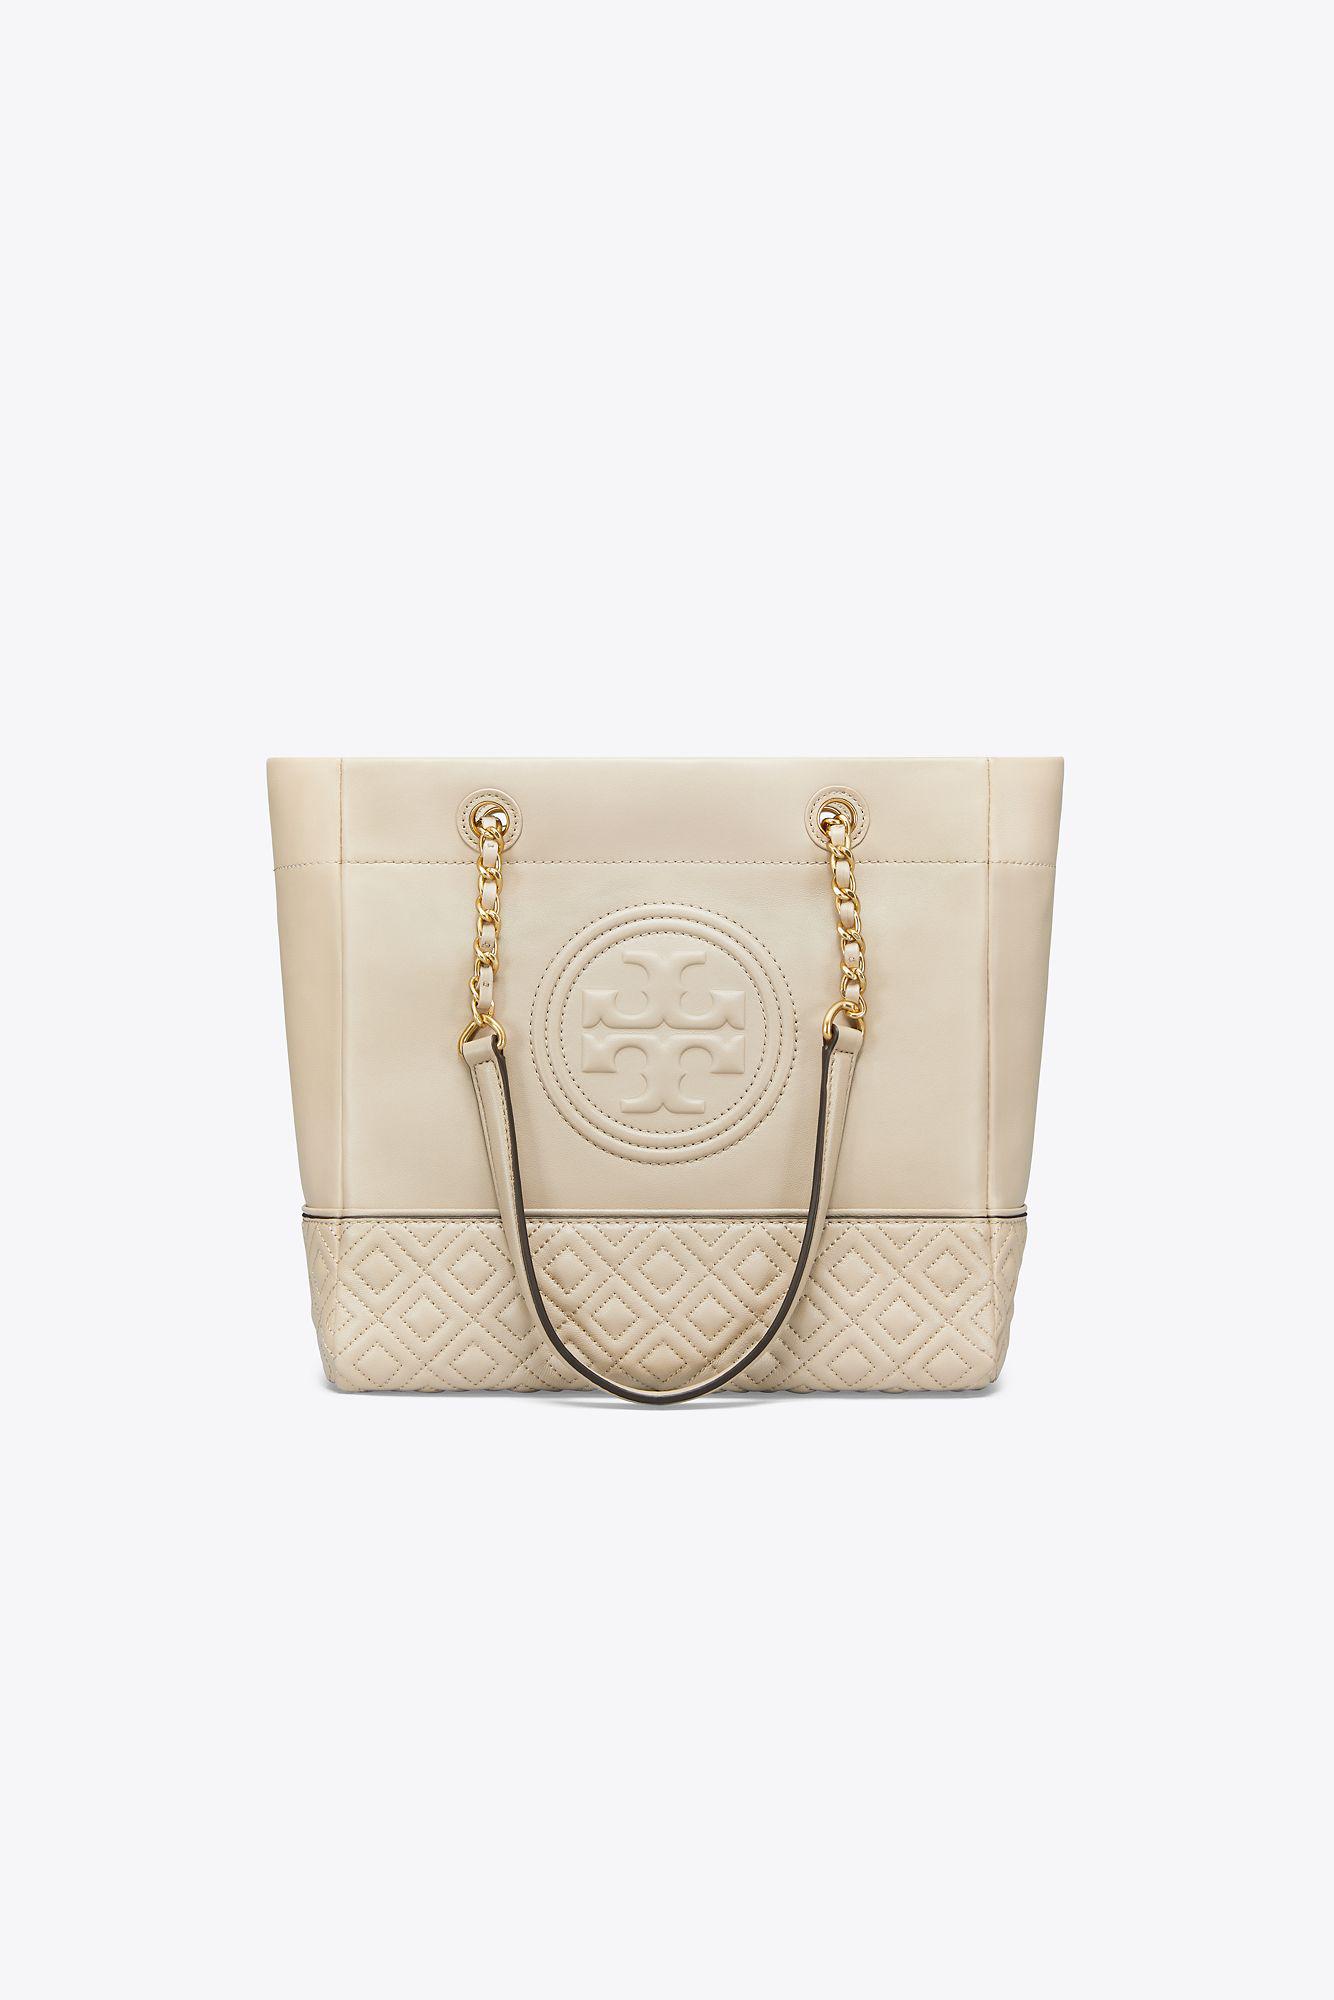 Tory Burch Fleming Tote in Natural | Lyst